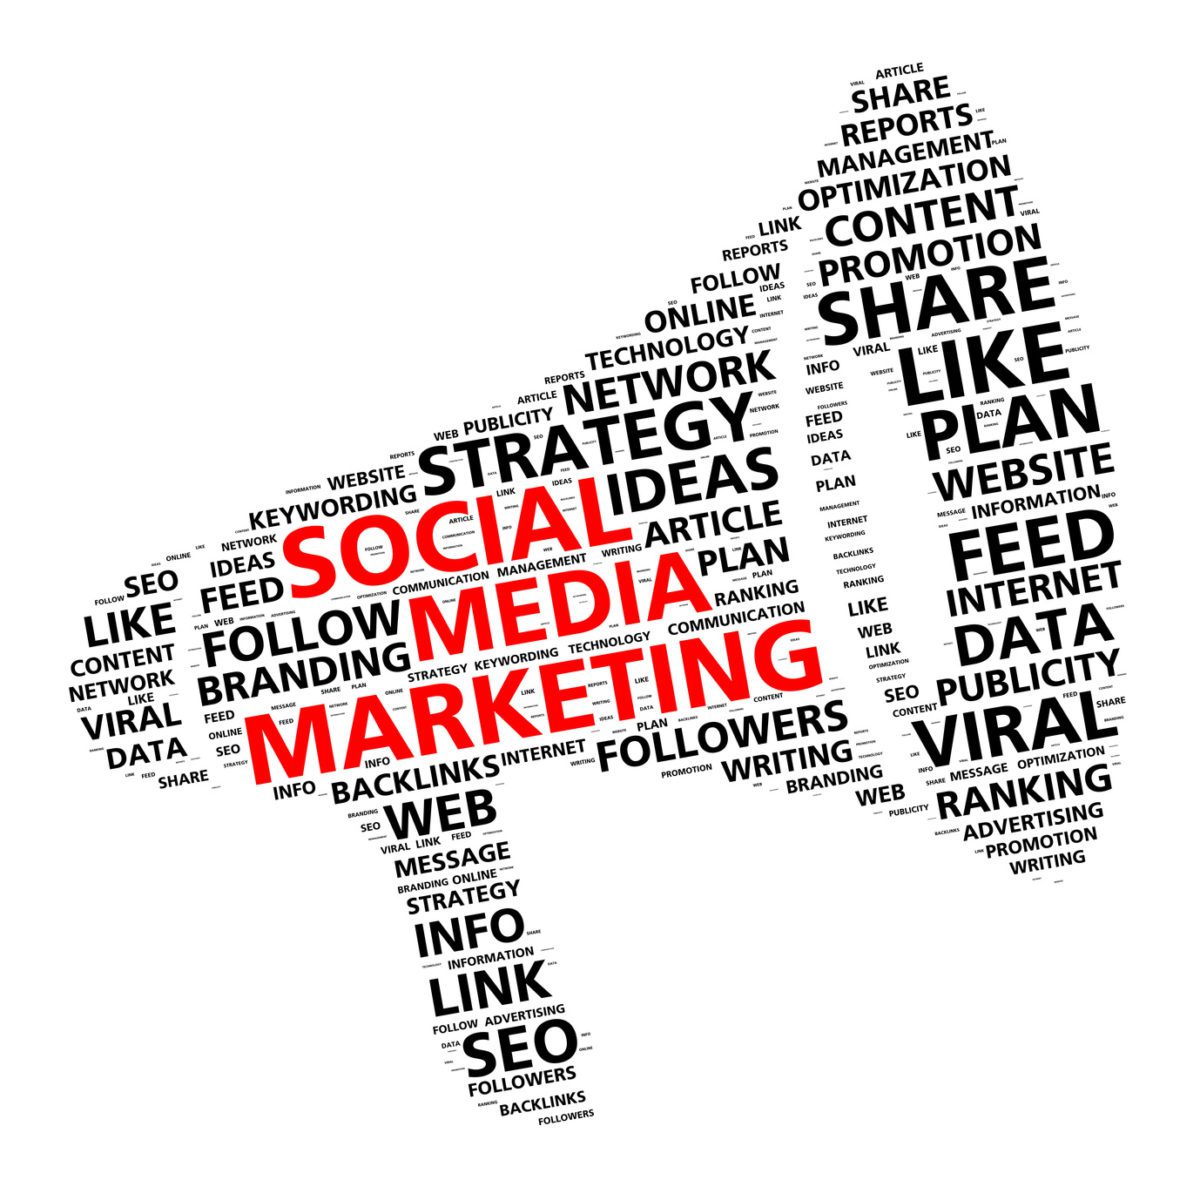 Are You Doing Social Media Marketing Right?